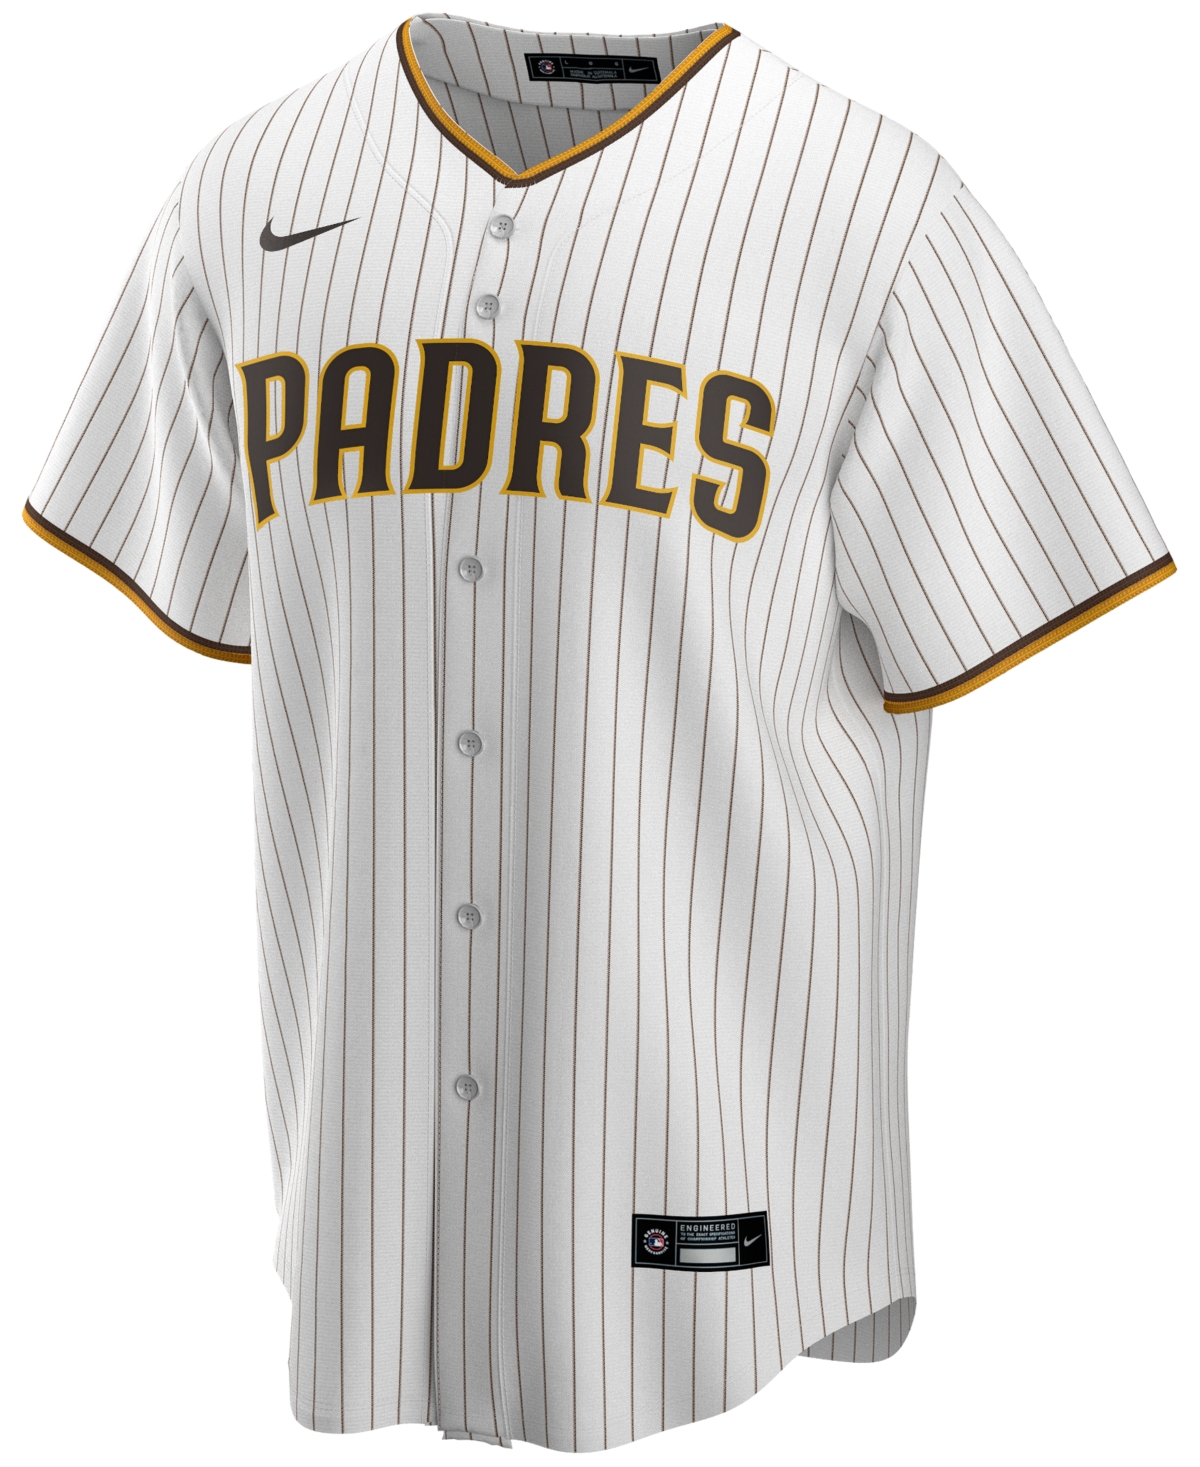 Nike Men's San Diego Padres Official Blank Replica Jersey